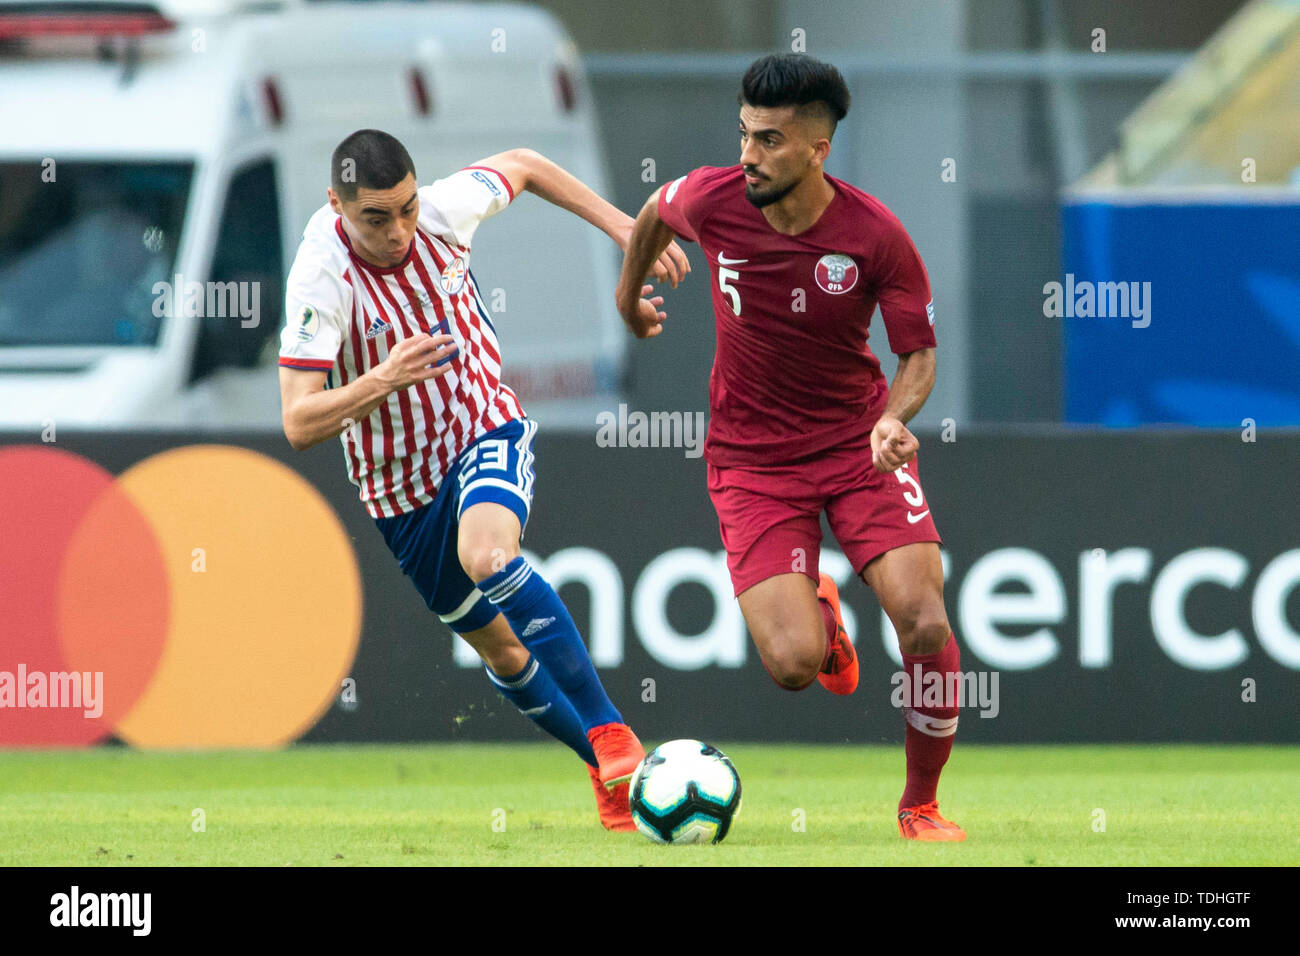 Rio De Janeiro, Brazil. 16th June, 2019. Tarek Salman (Meia) and M. Almirón  (Meia) during a match between Paraguay and Qatar, valid for the group stage  of the Copa América 2019, held